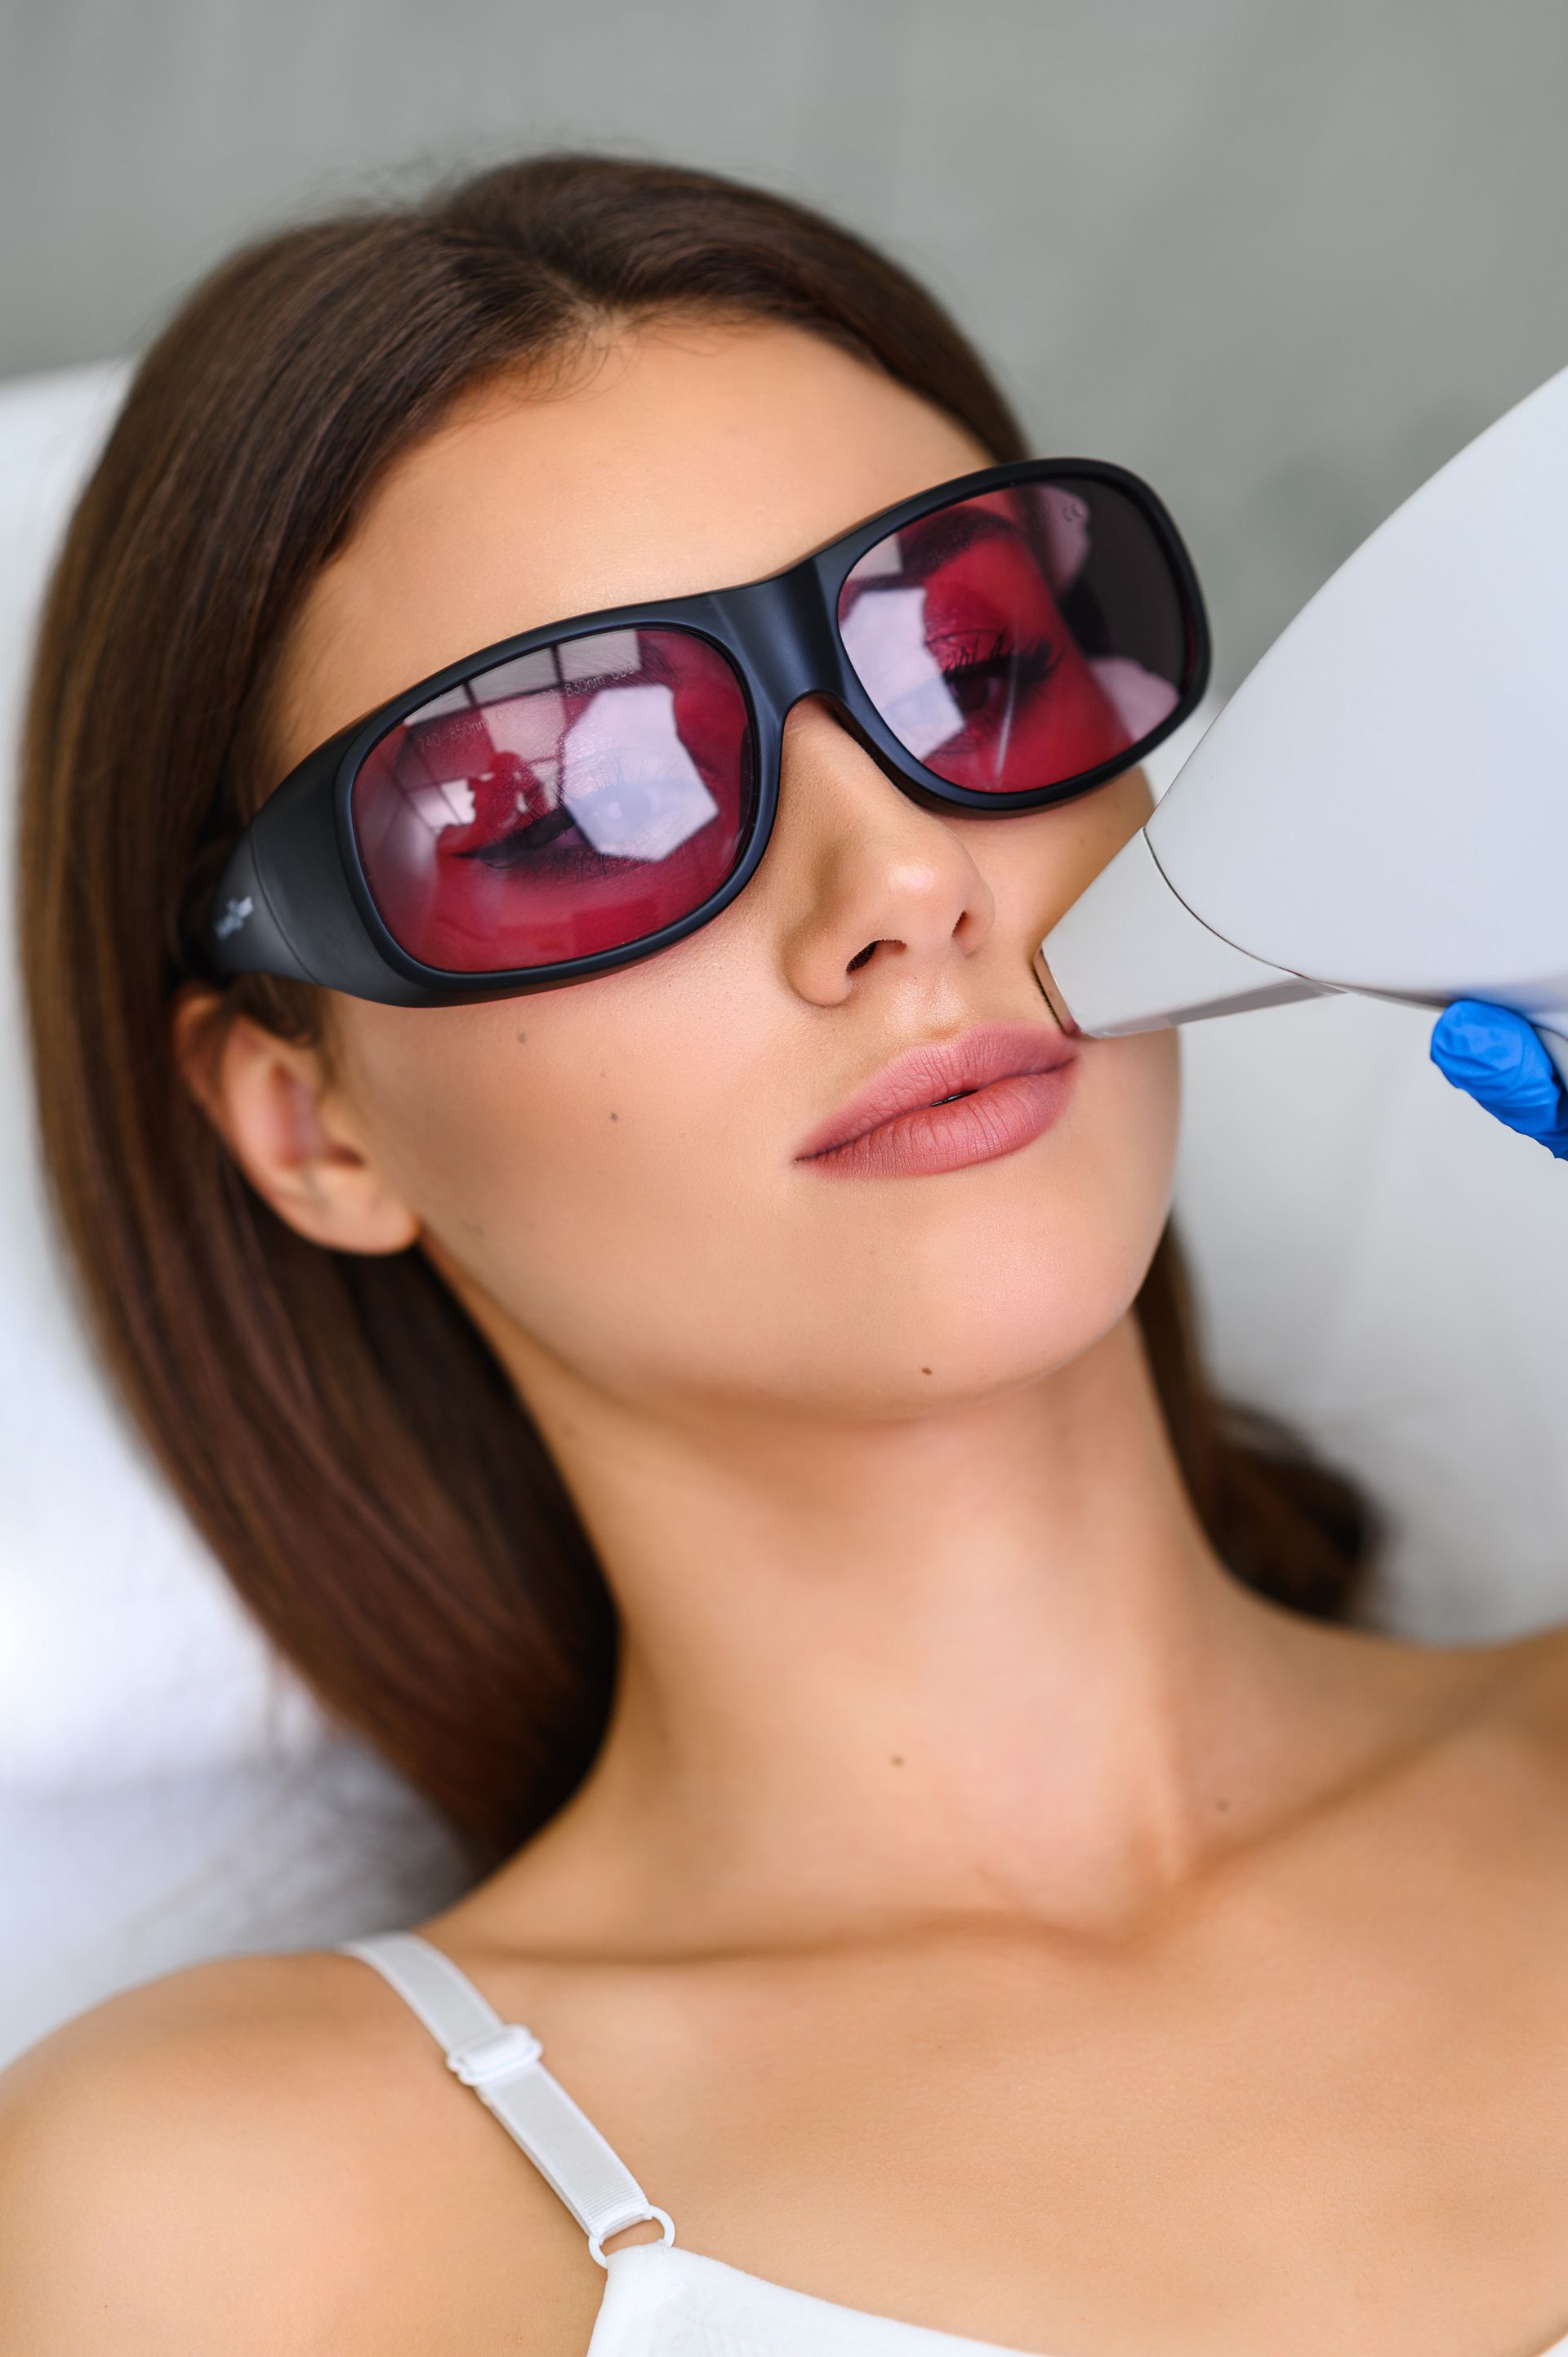 A woman wearing sunglasses is getting a laser hair removal treatment on her face.